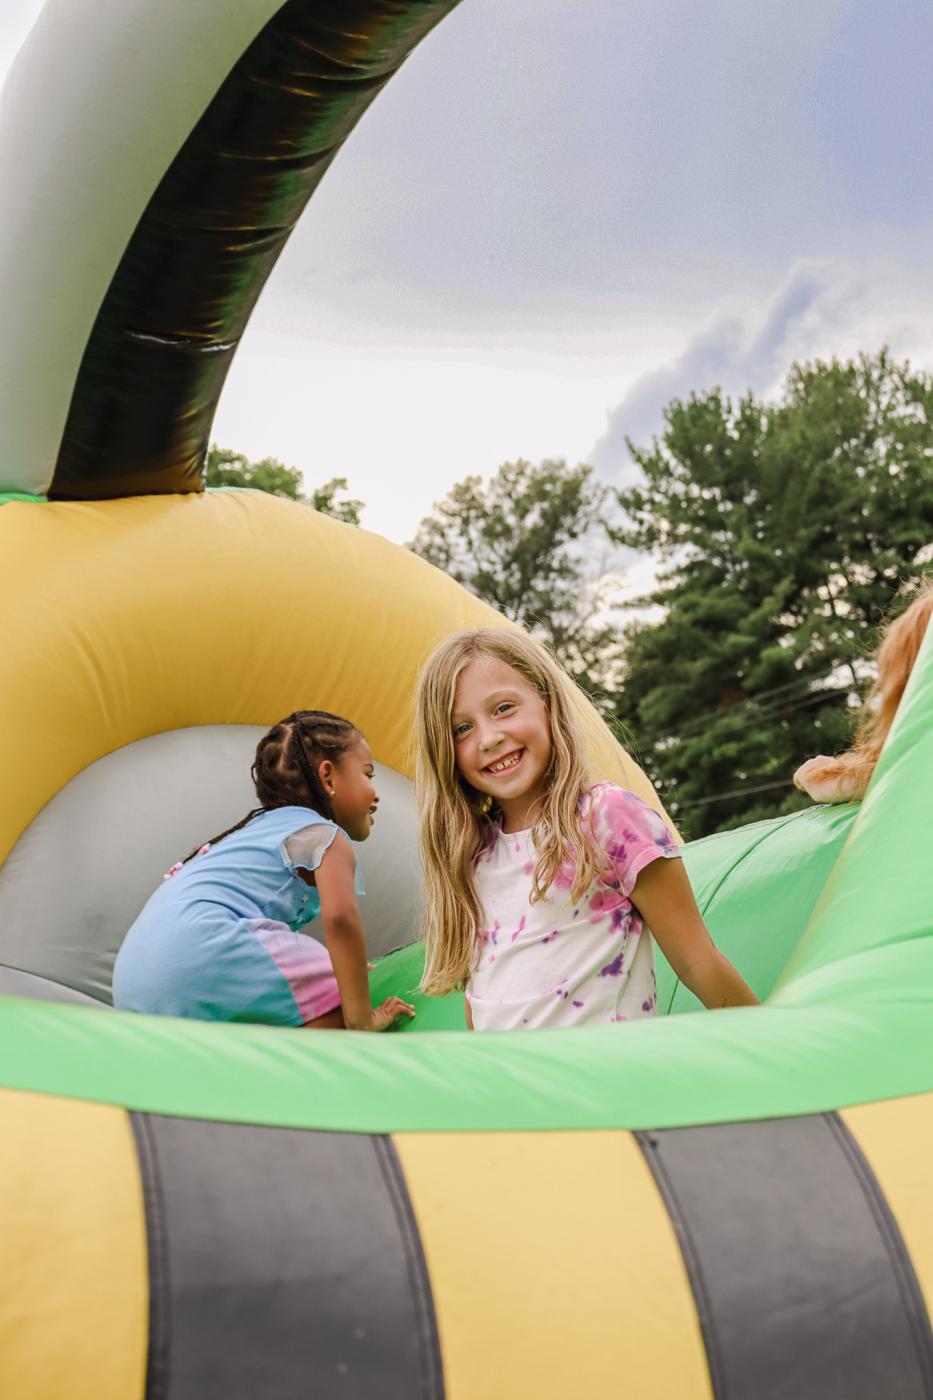 A girl smiling while on the bounce house